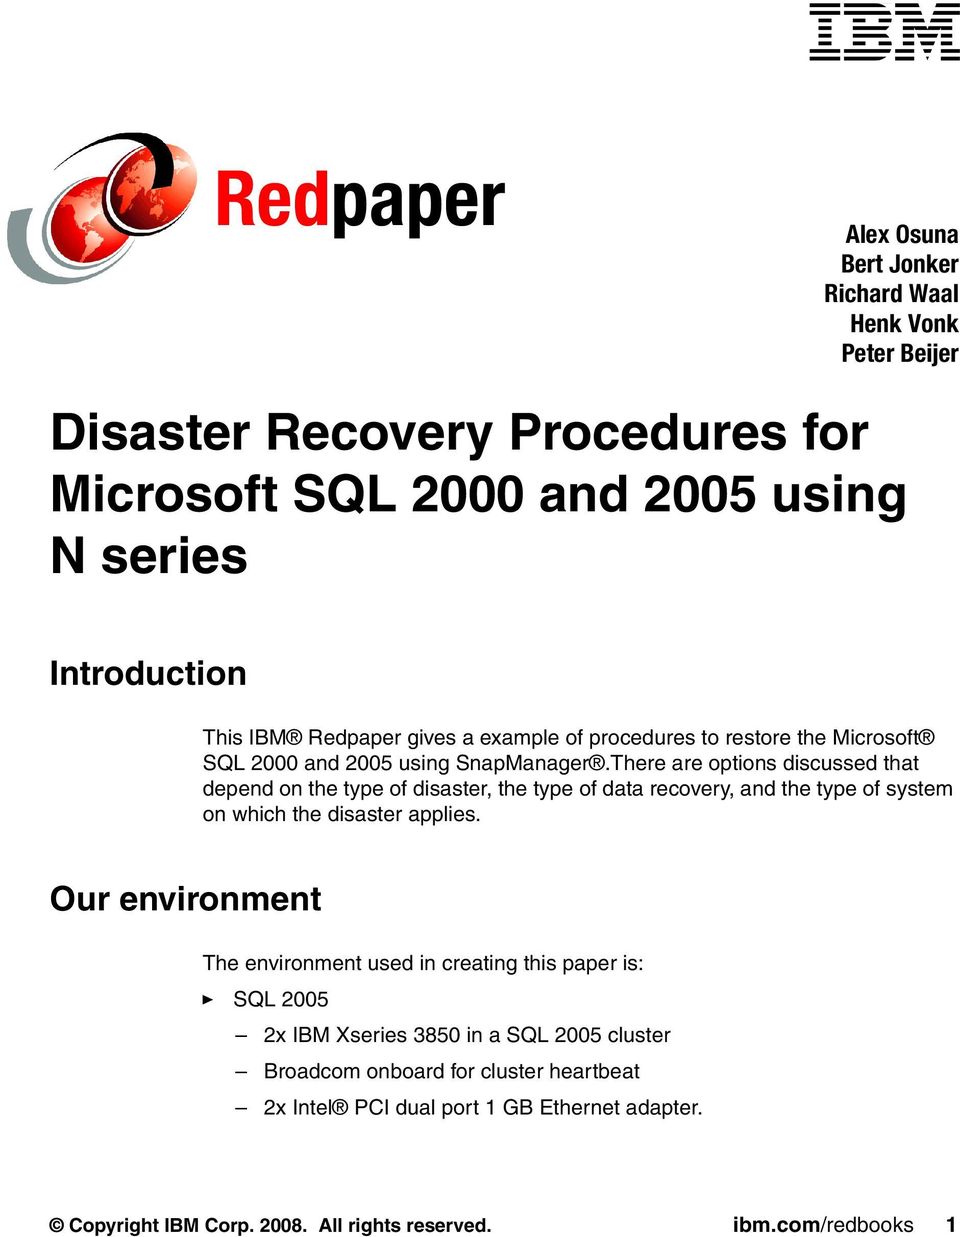 There are options discussed that depend on the type of disaster, the type of data recovery, and the type of system on which the disaster applies.